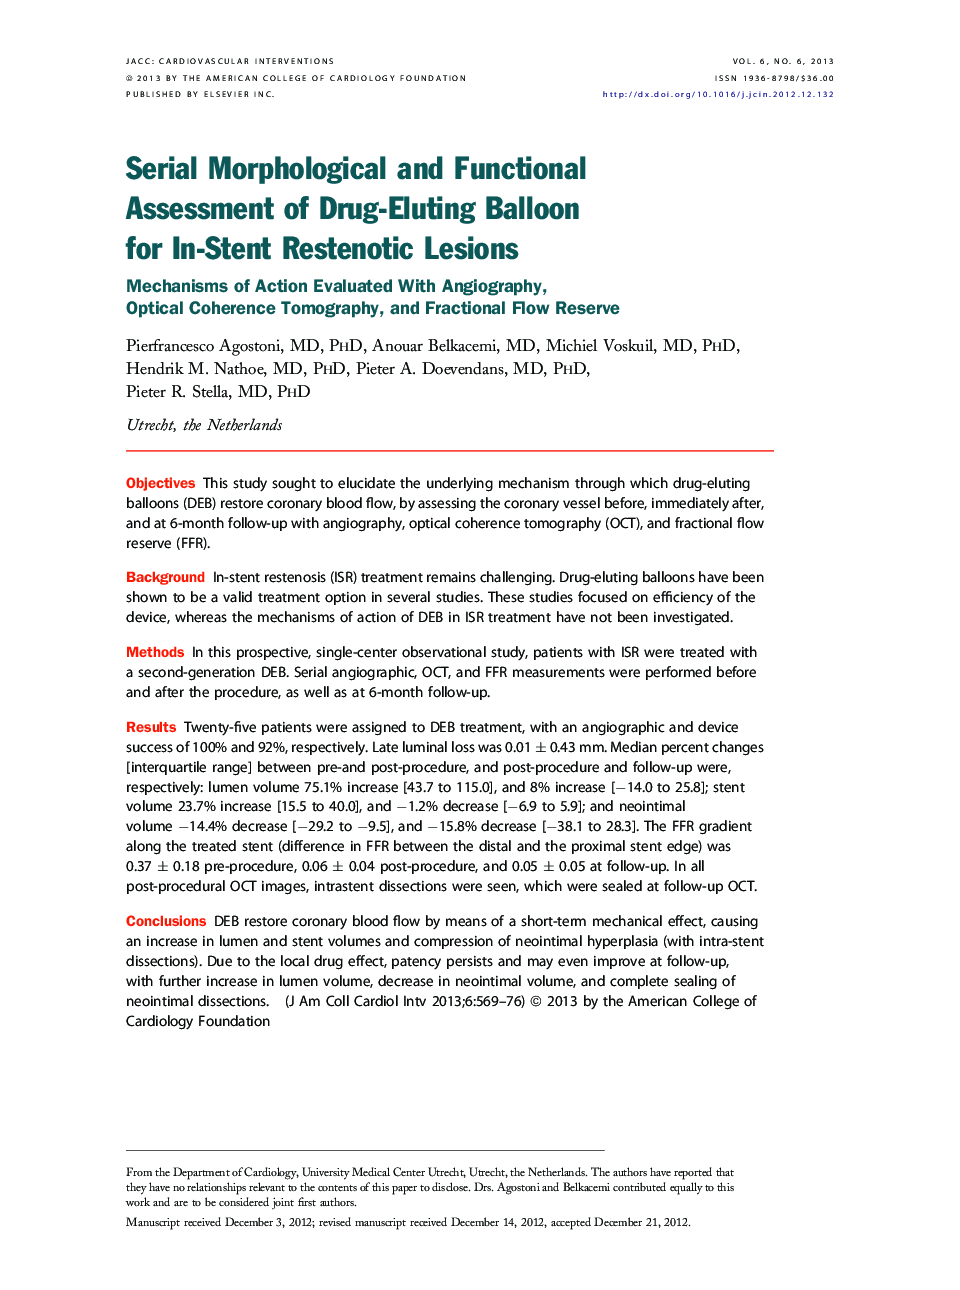 Serial Morphological and Functional Assessment of Drug-Eluting Balloon for In-Stent Restenotic Lesions : Mechanisms of Action Evaluated With Angiography, Optical Coherence Tomography, and Fractional Flow Reserve